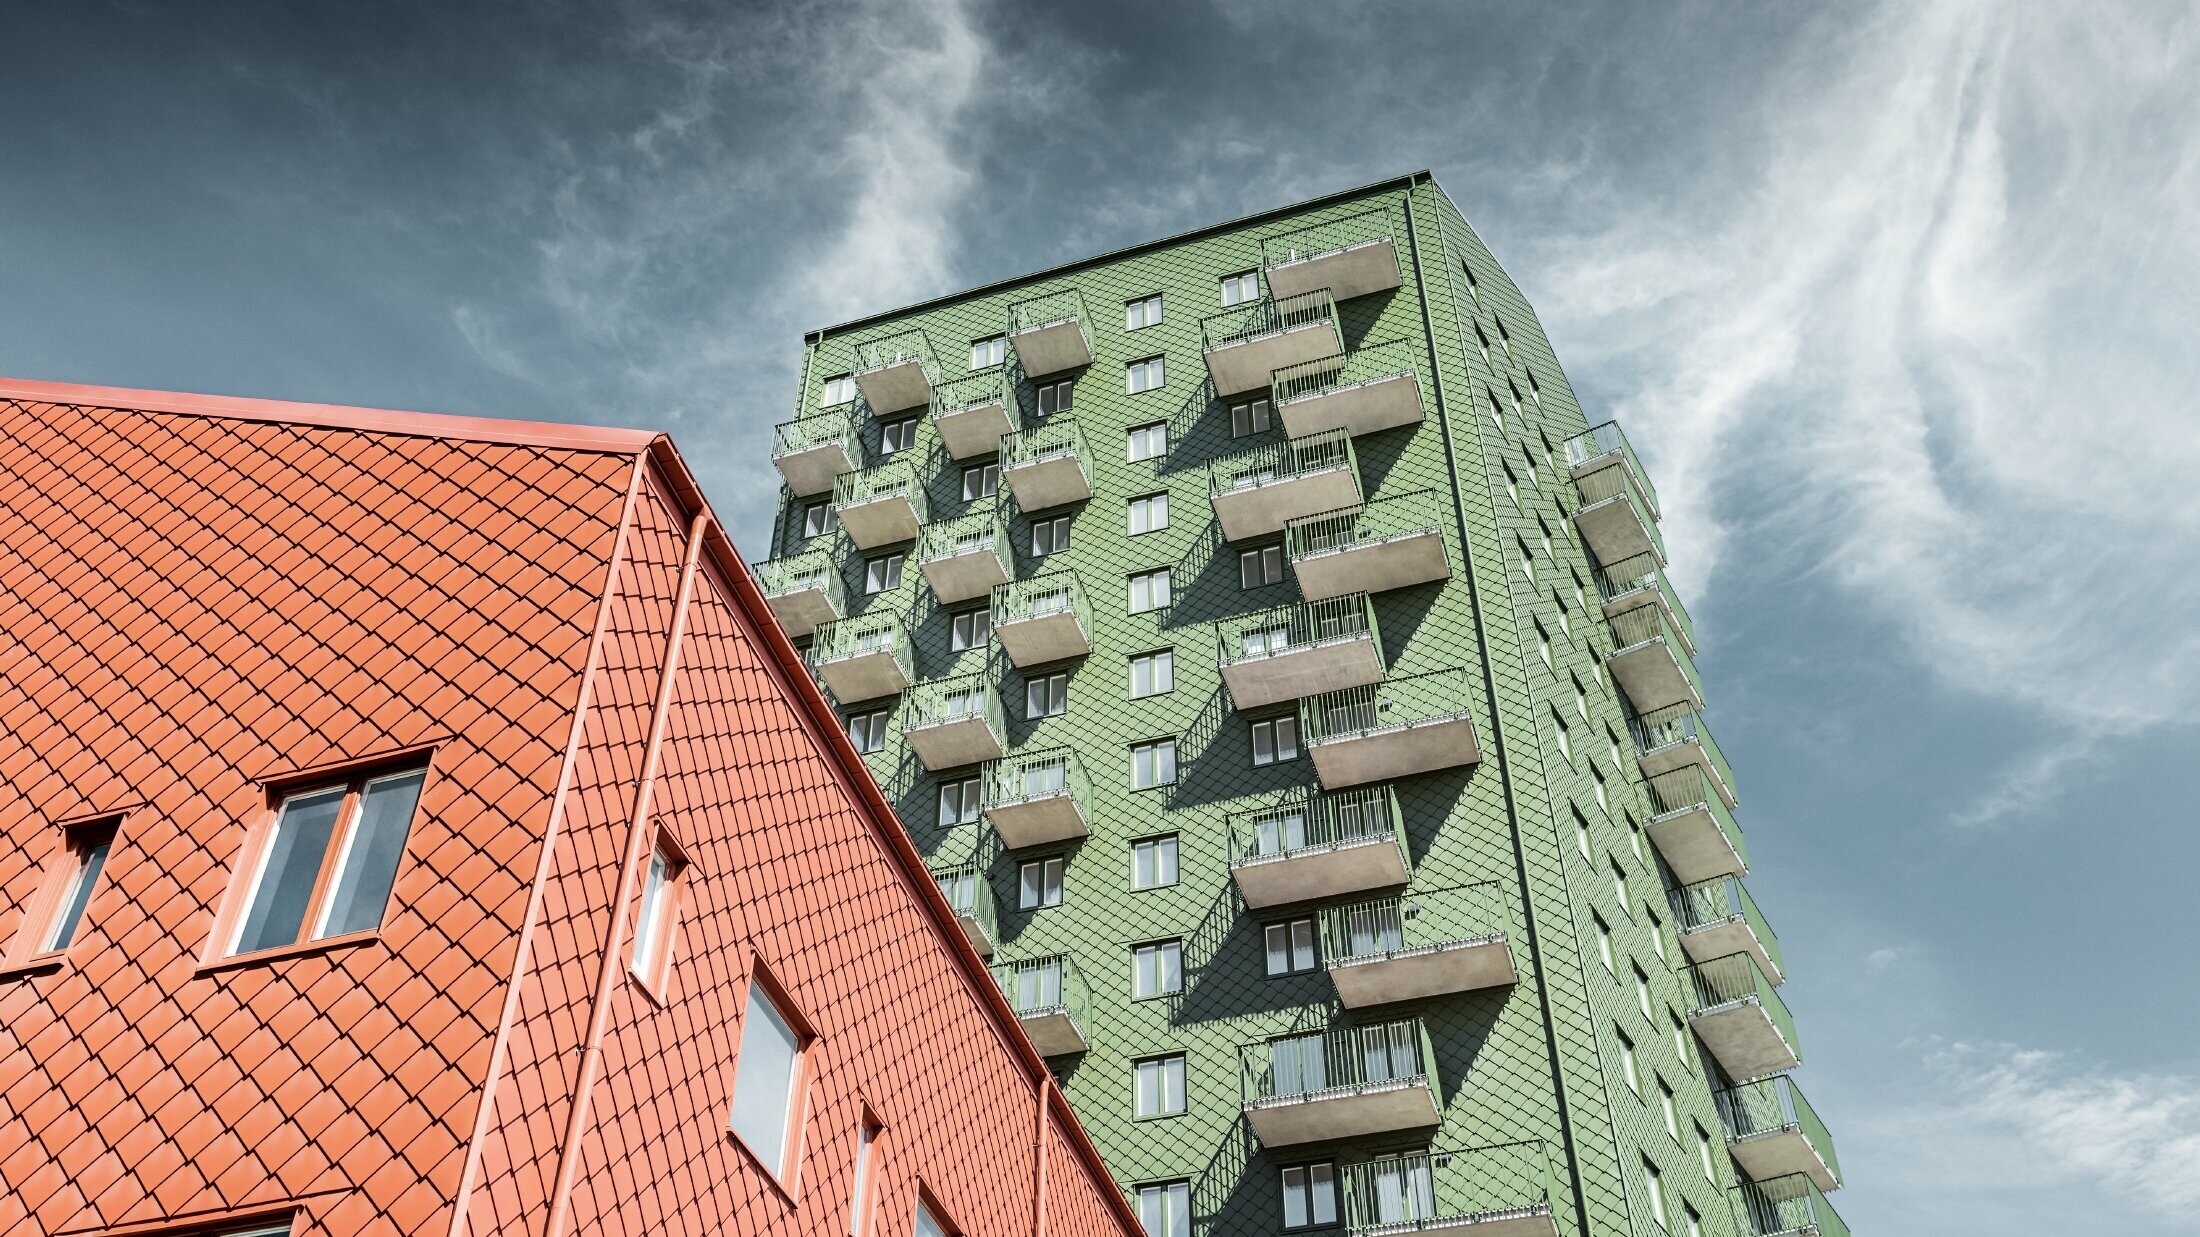 High-rise buildings with balconies with a façade design composed of PREFA rhomboid façade tiles 29 × 29 in olive green and brick red